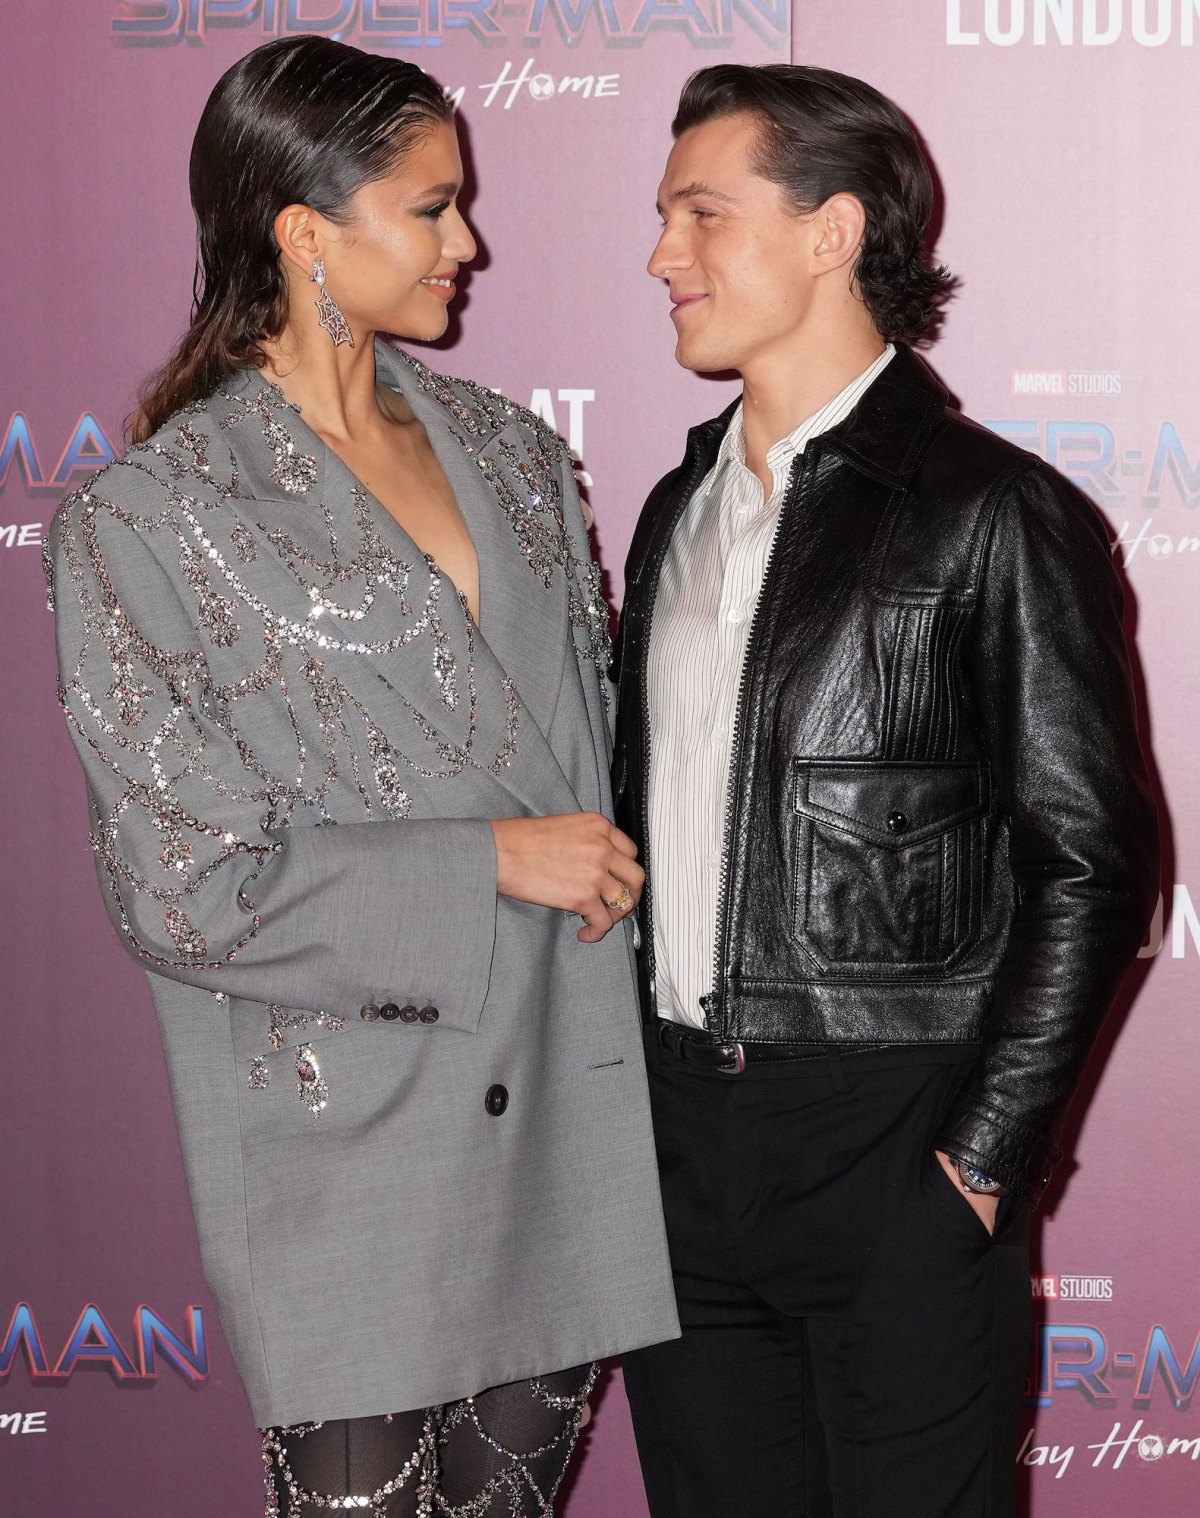 Tom Holland and Zendaya come clean on marriage rumours